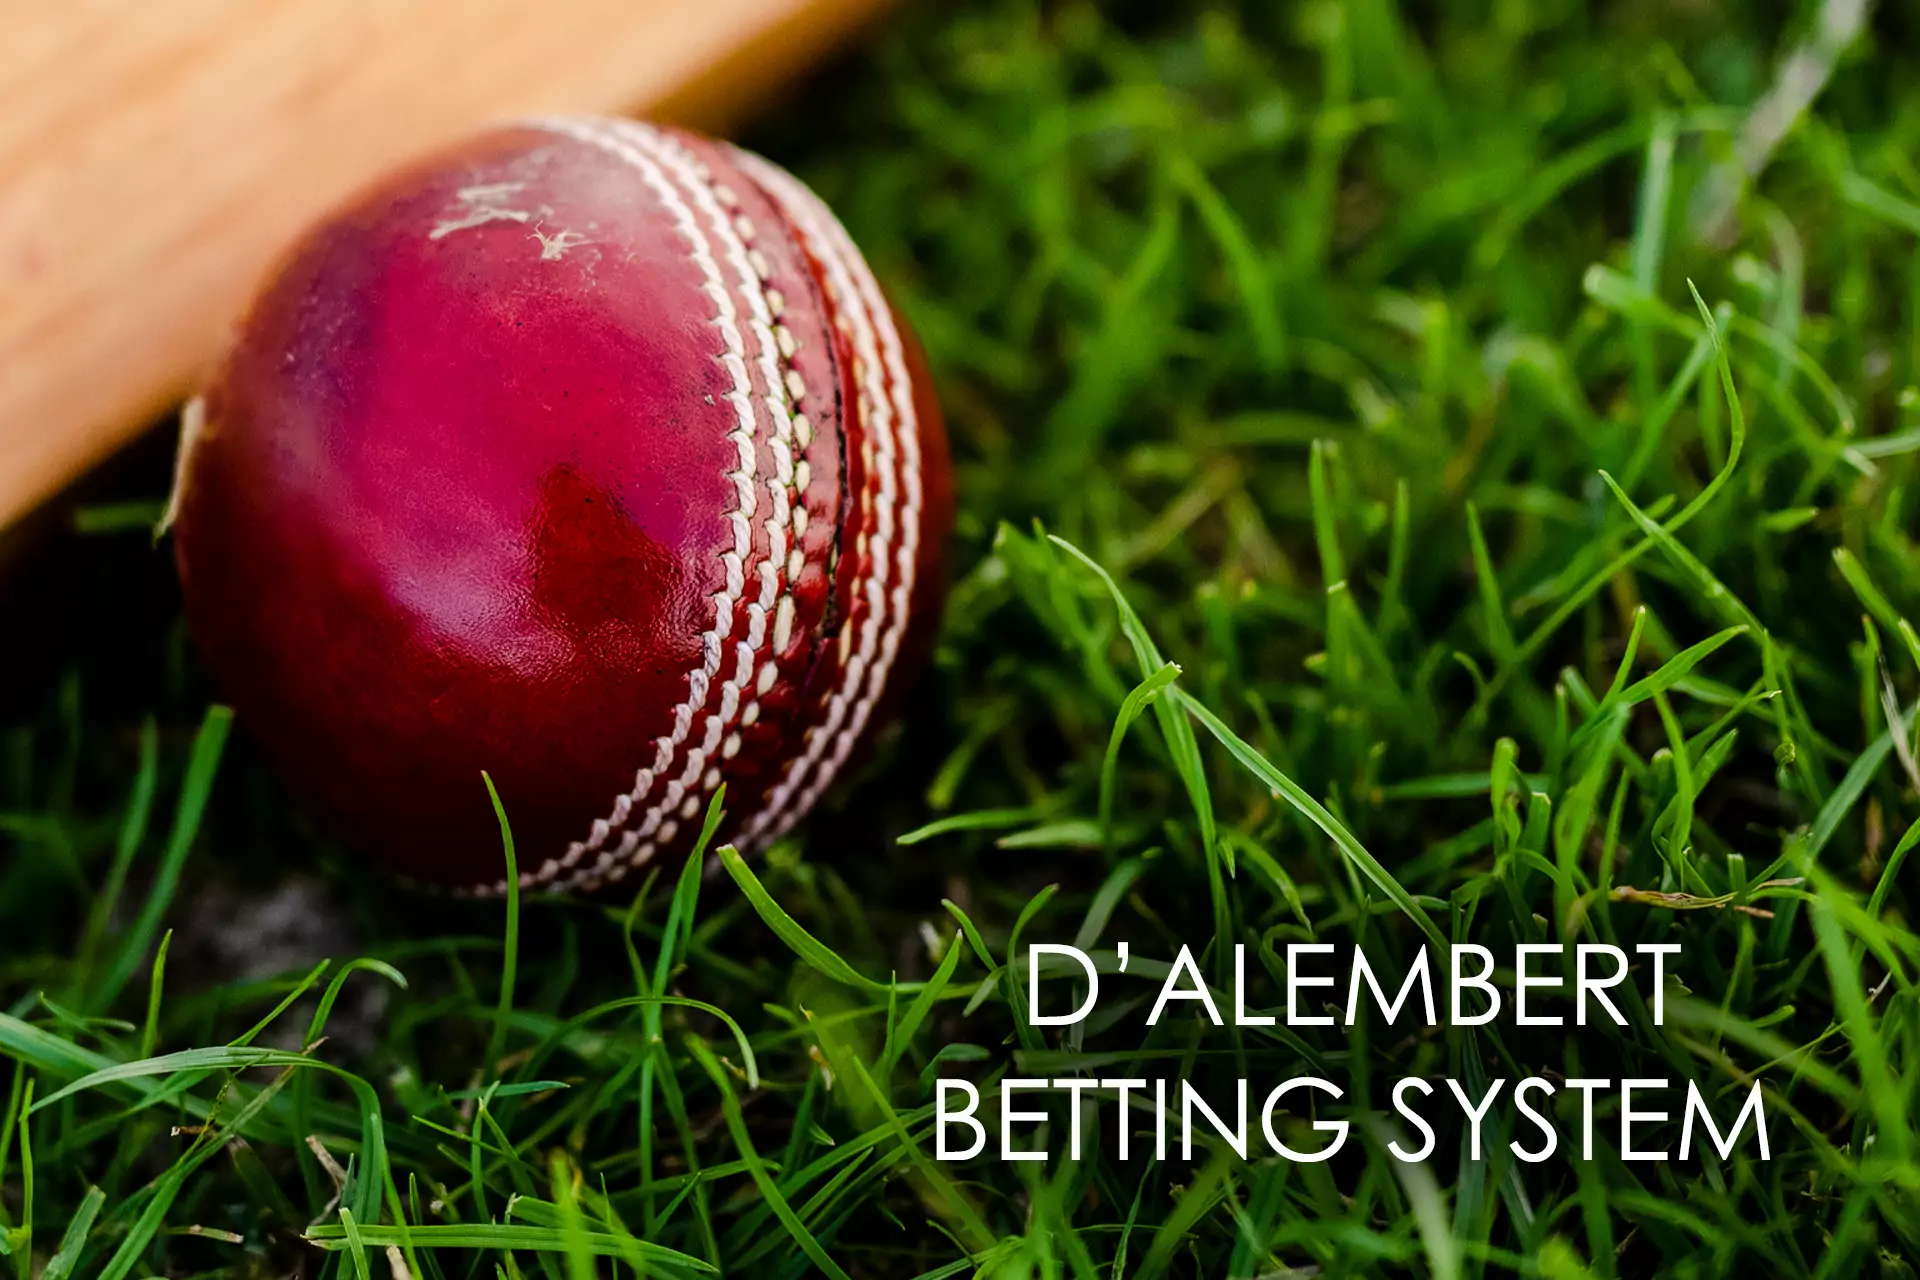 According to the principle of the d'Alembert Betting System, if you win, you increase the bet by one unit.